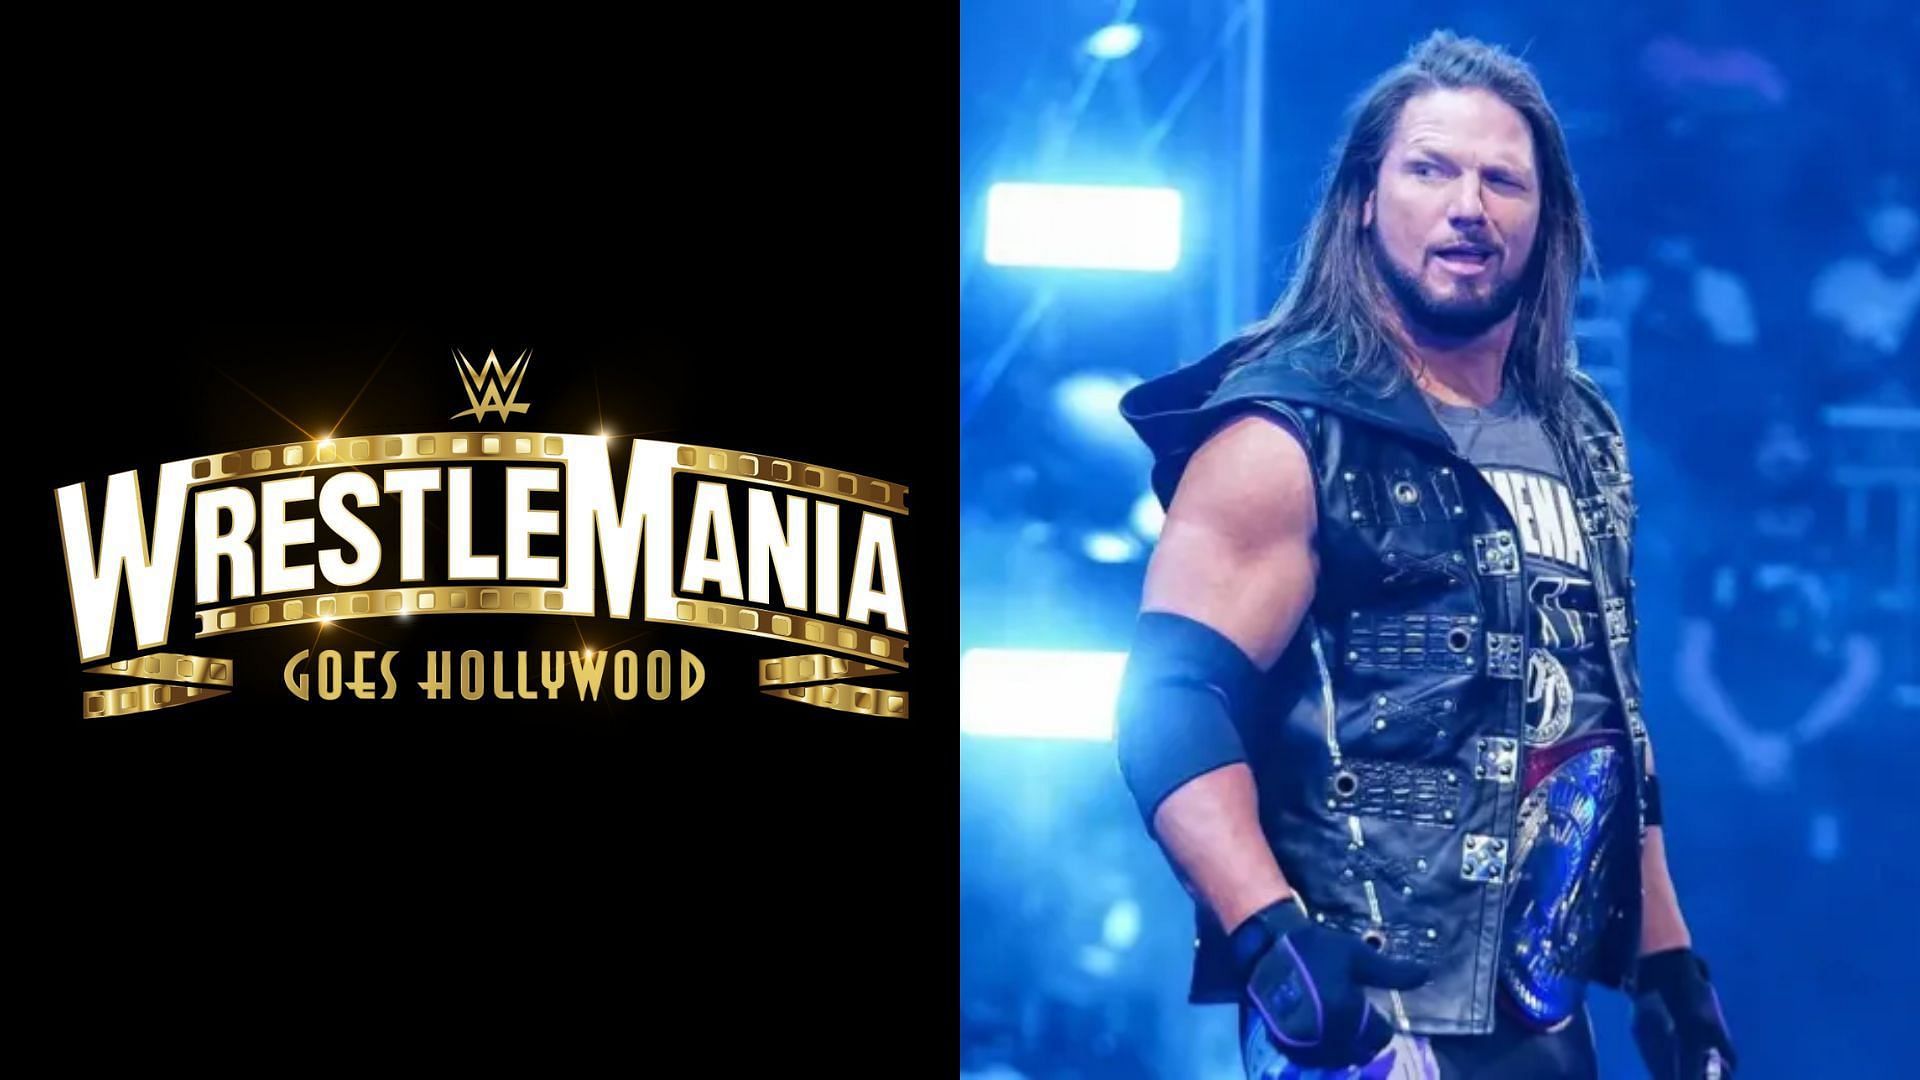 AJ Styles is seemingly going to miss his first WrestleMania in WWE